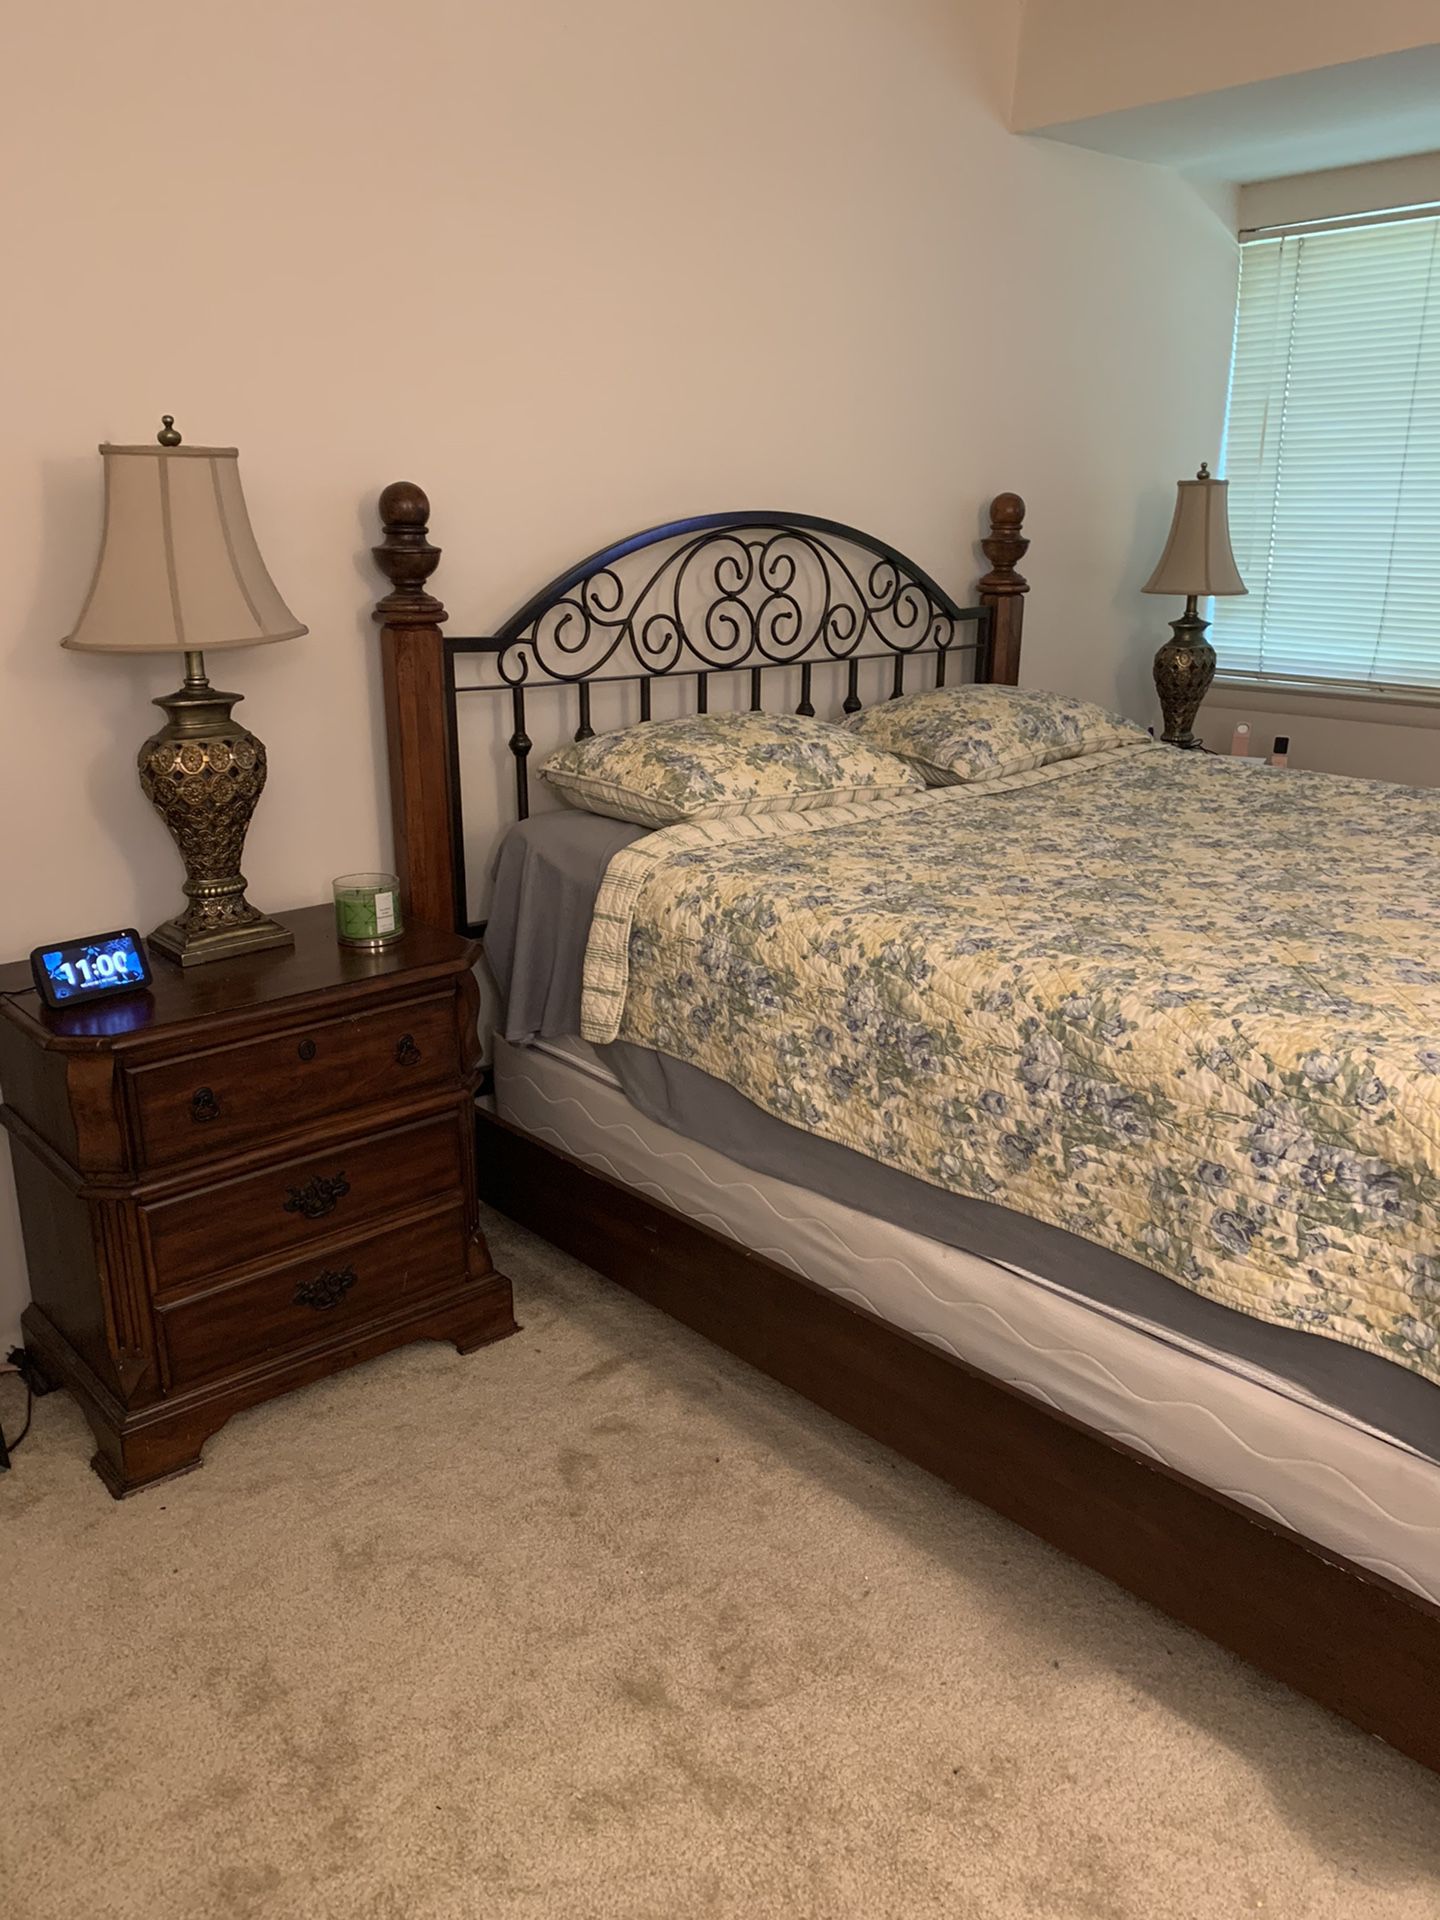 Queen sized bed with mattress, frame and boxspring